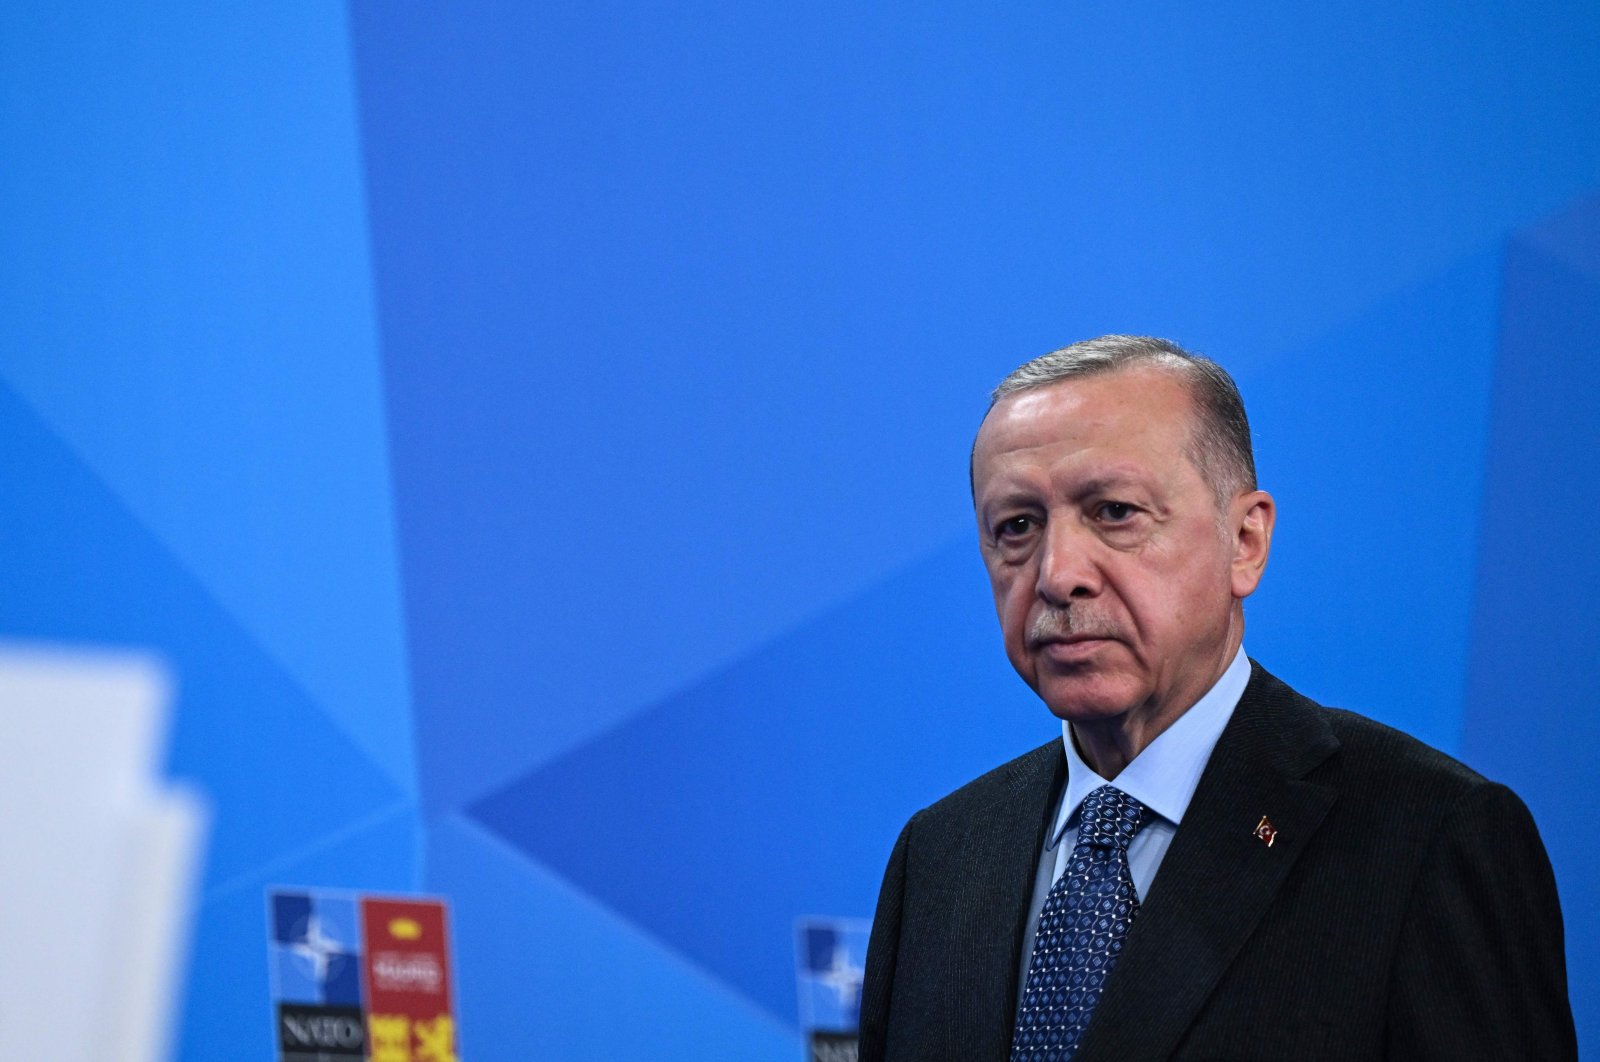 Turkey&#039;s President Recep Tayyip Erdoğan addresses media representatives during a press conference at the NATO summit at the Ifema congress centre in Madrid, on June 30, 2022. (AFP Photo)